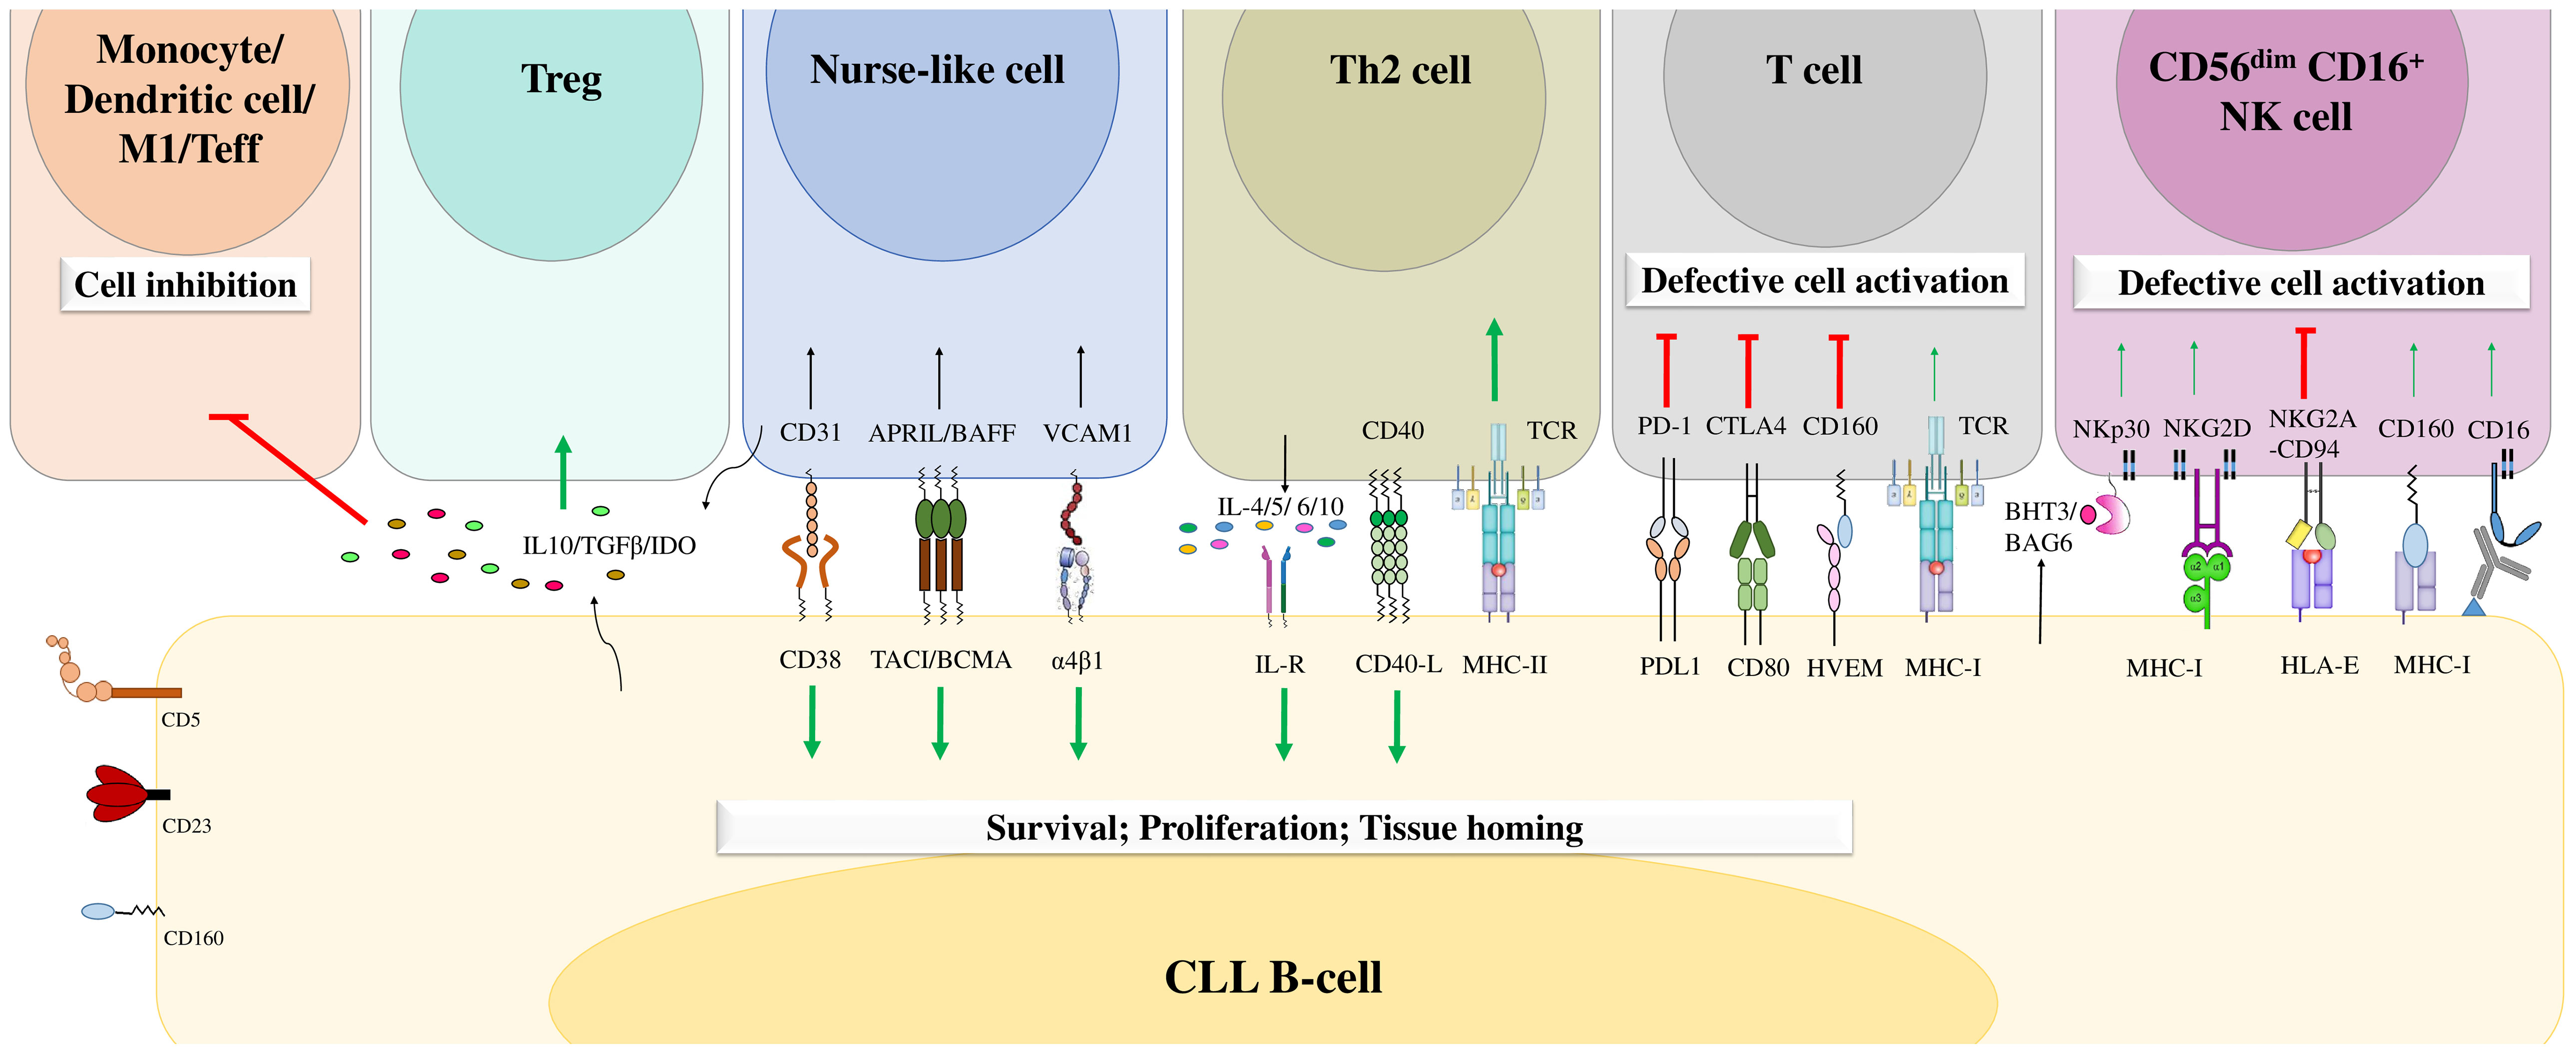 Frontiers | CD160 receptor in CLL: Current state and future avenues